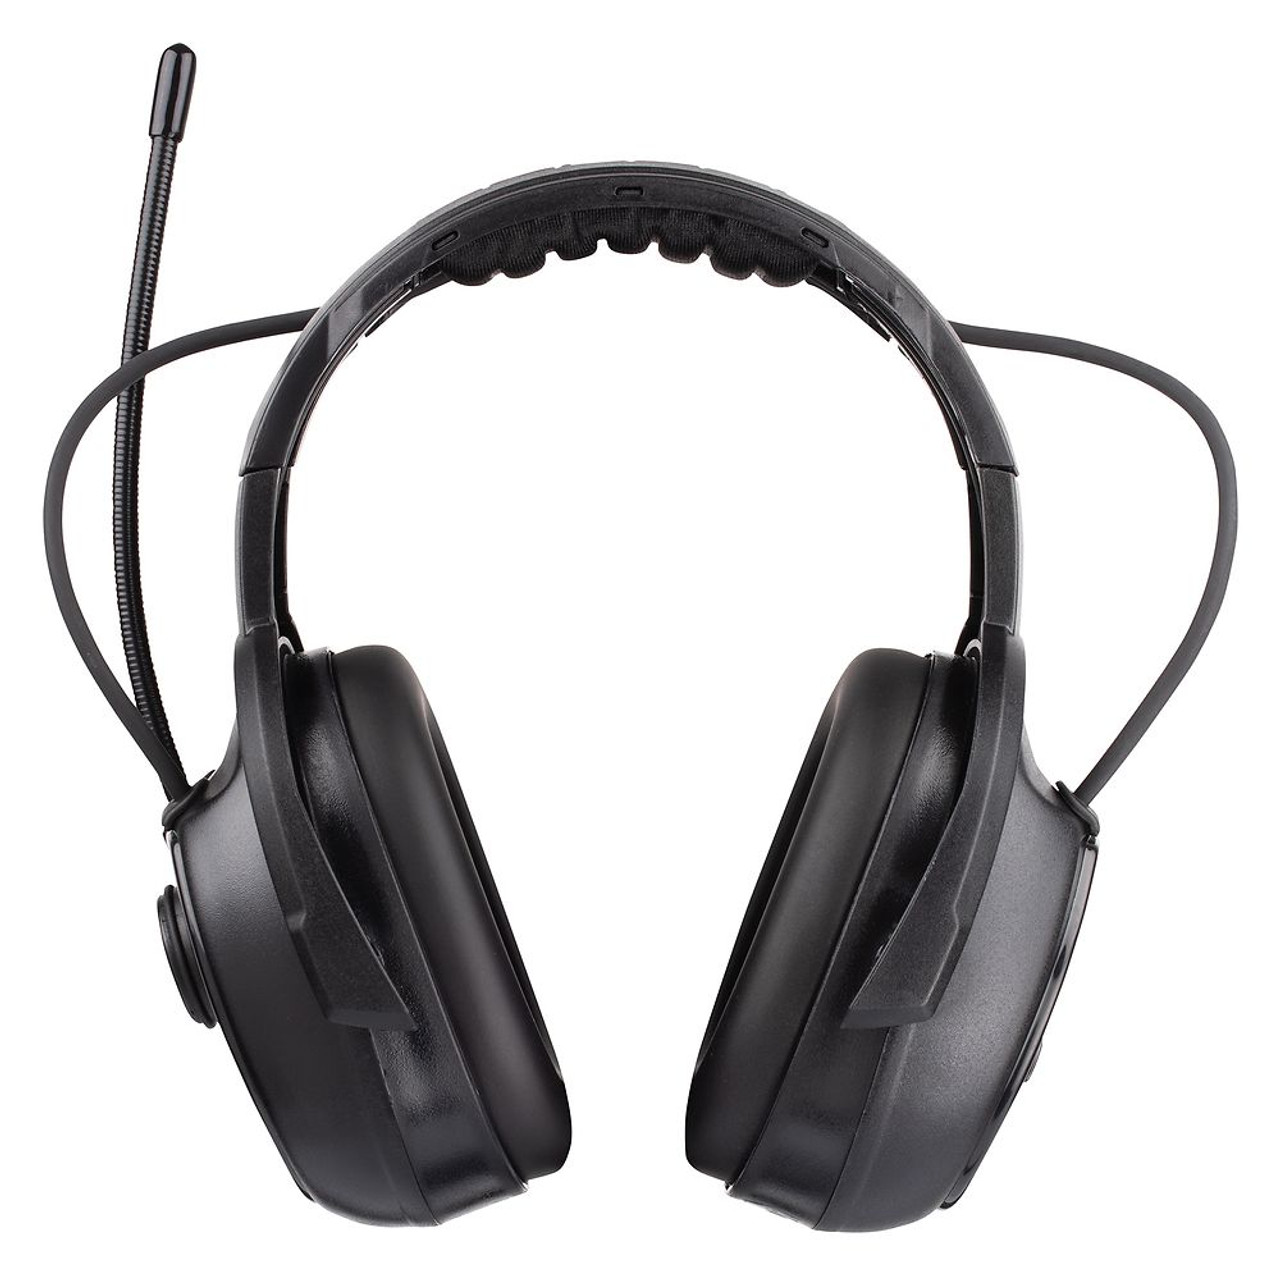 ZEKLER Ear Muffs | 412 R Class 2 AUX Input, FM Radio  with Over Head for Workshops, Machinery Operator in Melbourne, Sydney and Brisbane.